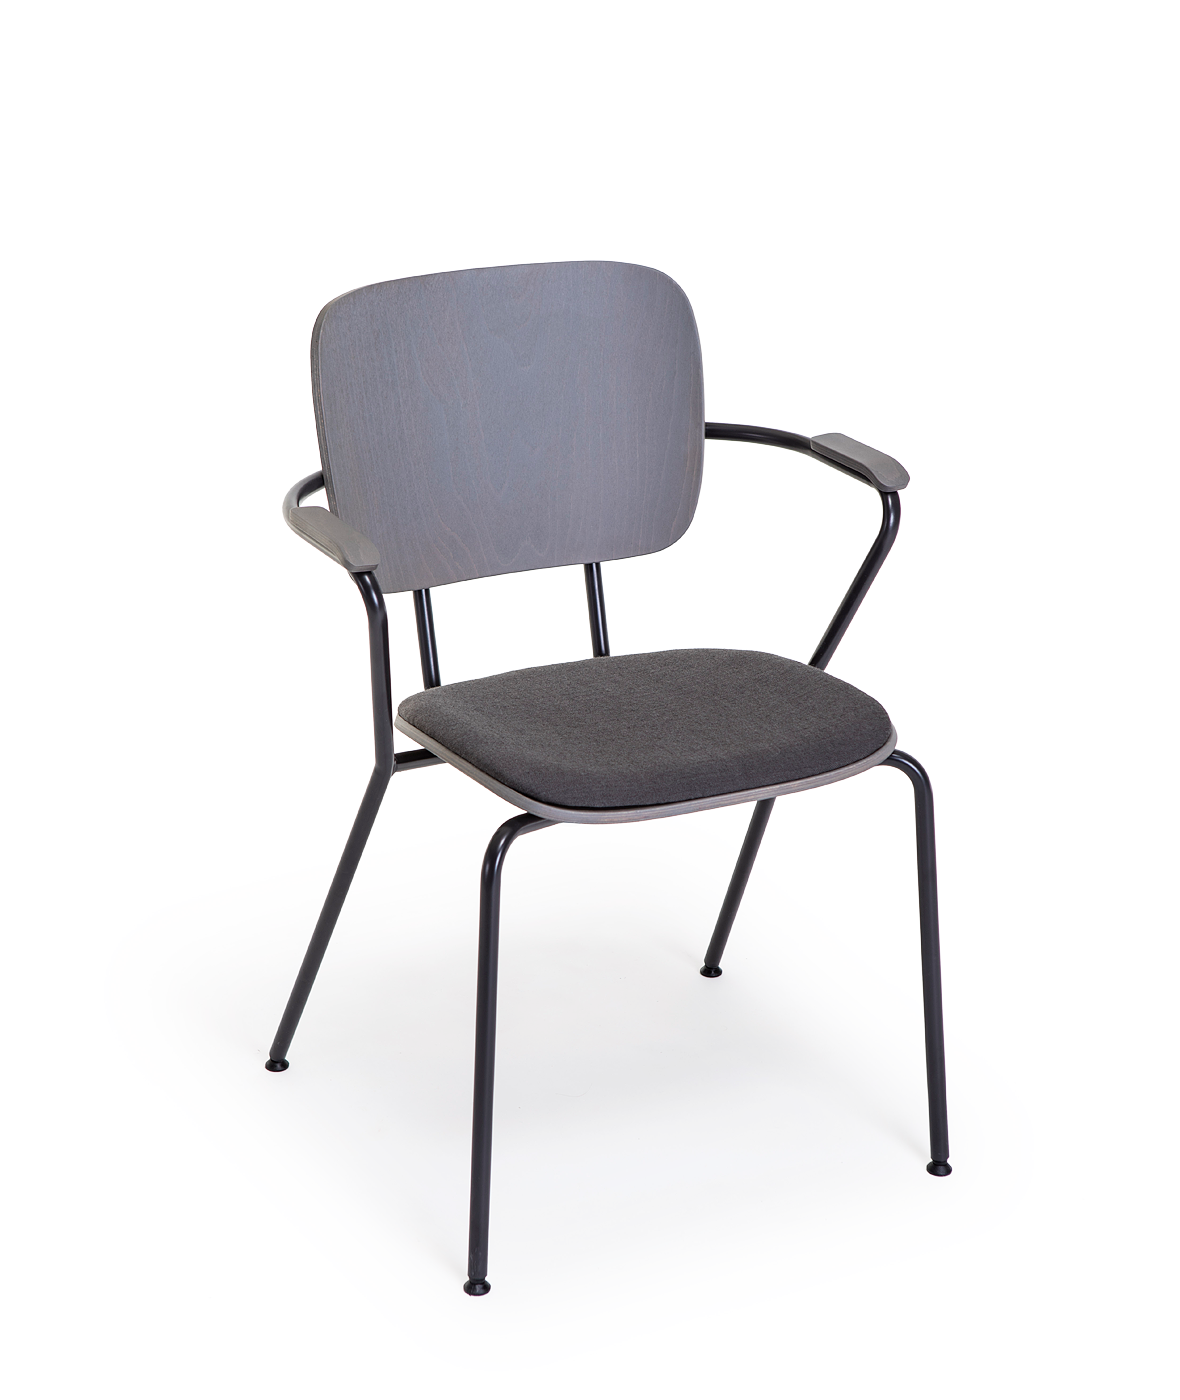 ABC chair with metallic armrests and legs - Vergés